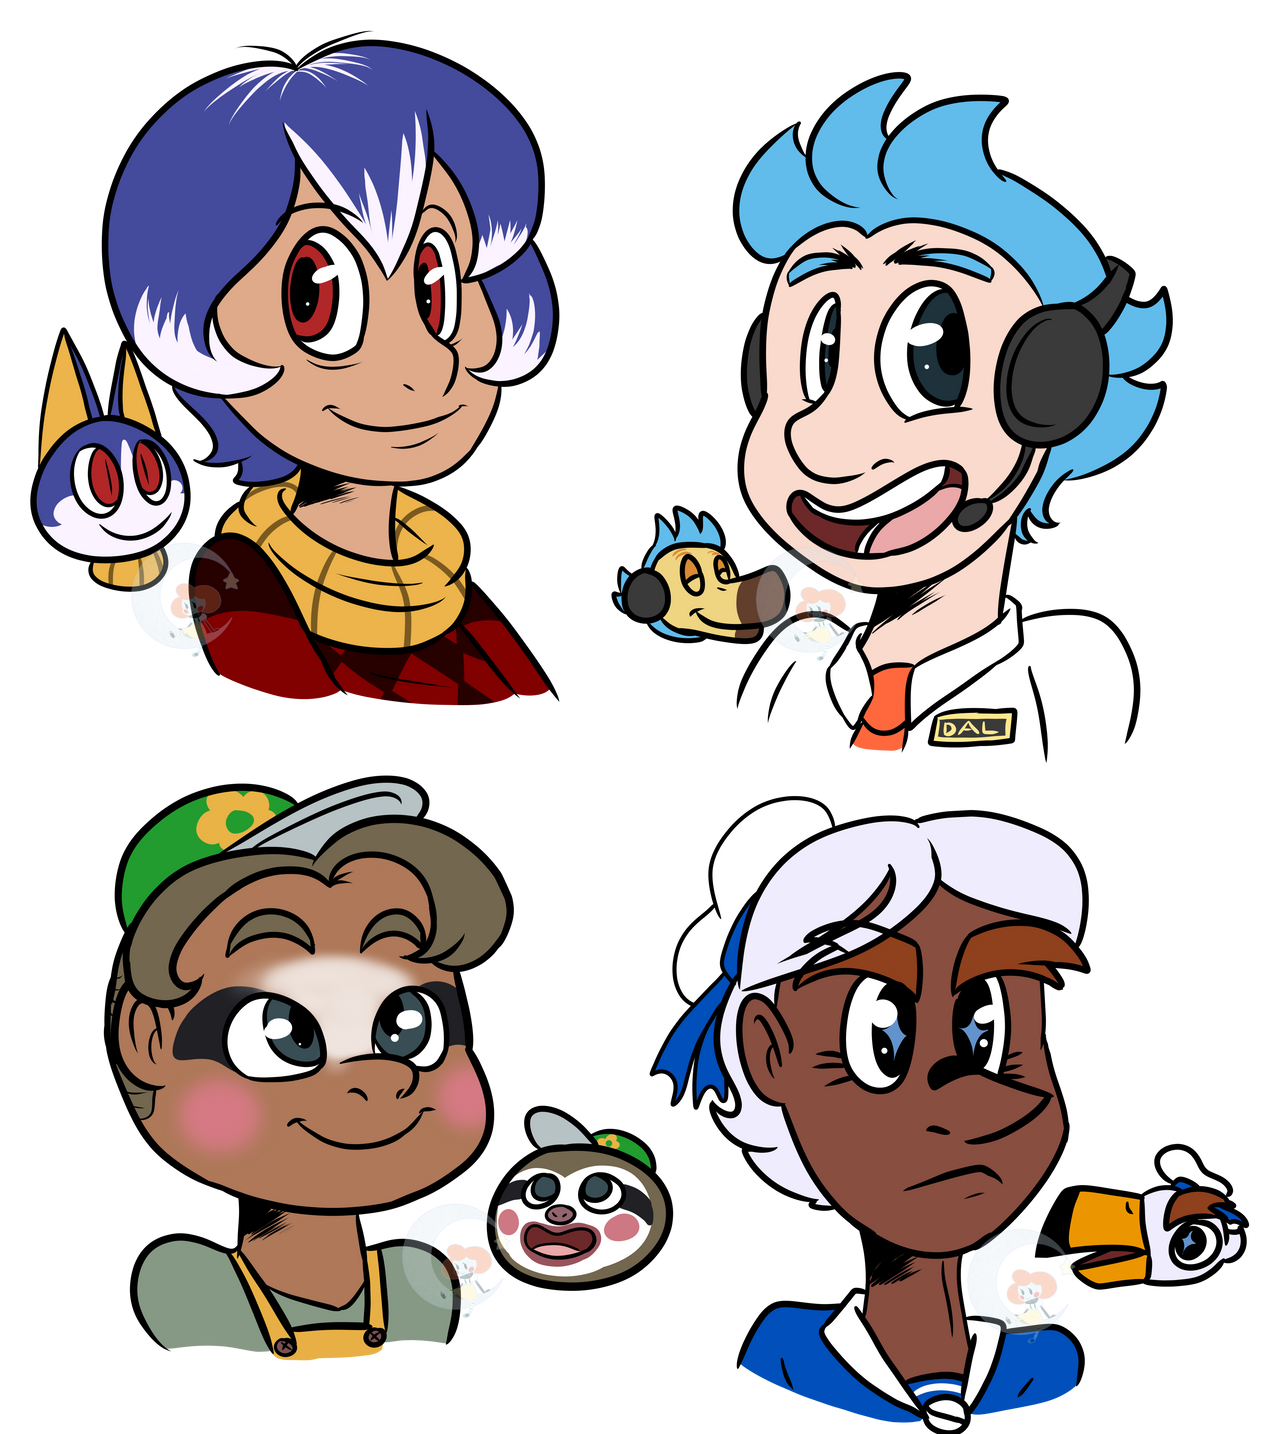 Human Special Animal Crossing characters by Luckynight48 on DeviantArt